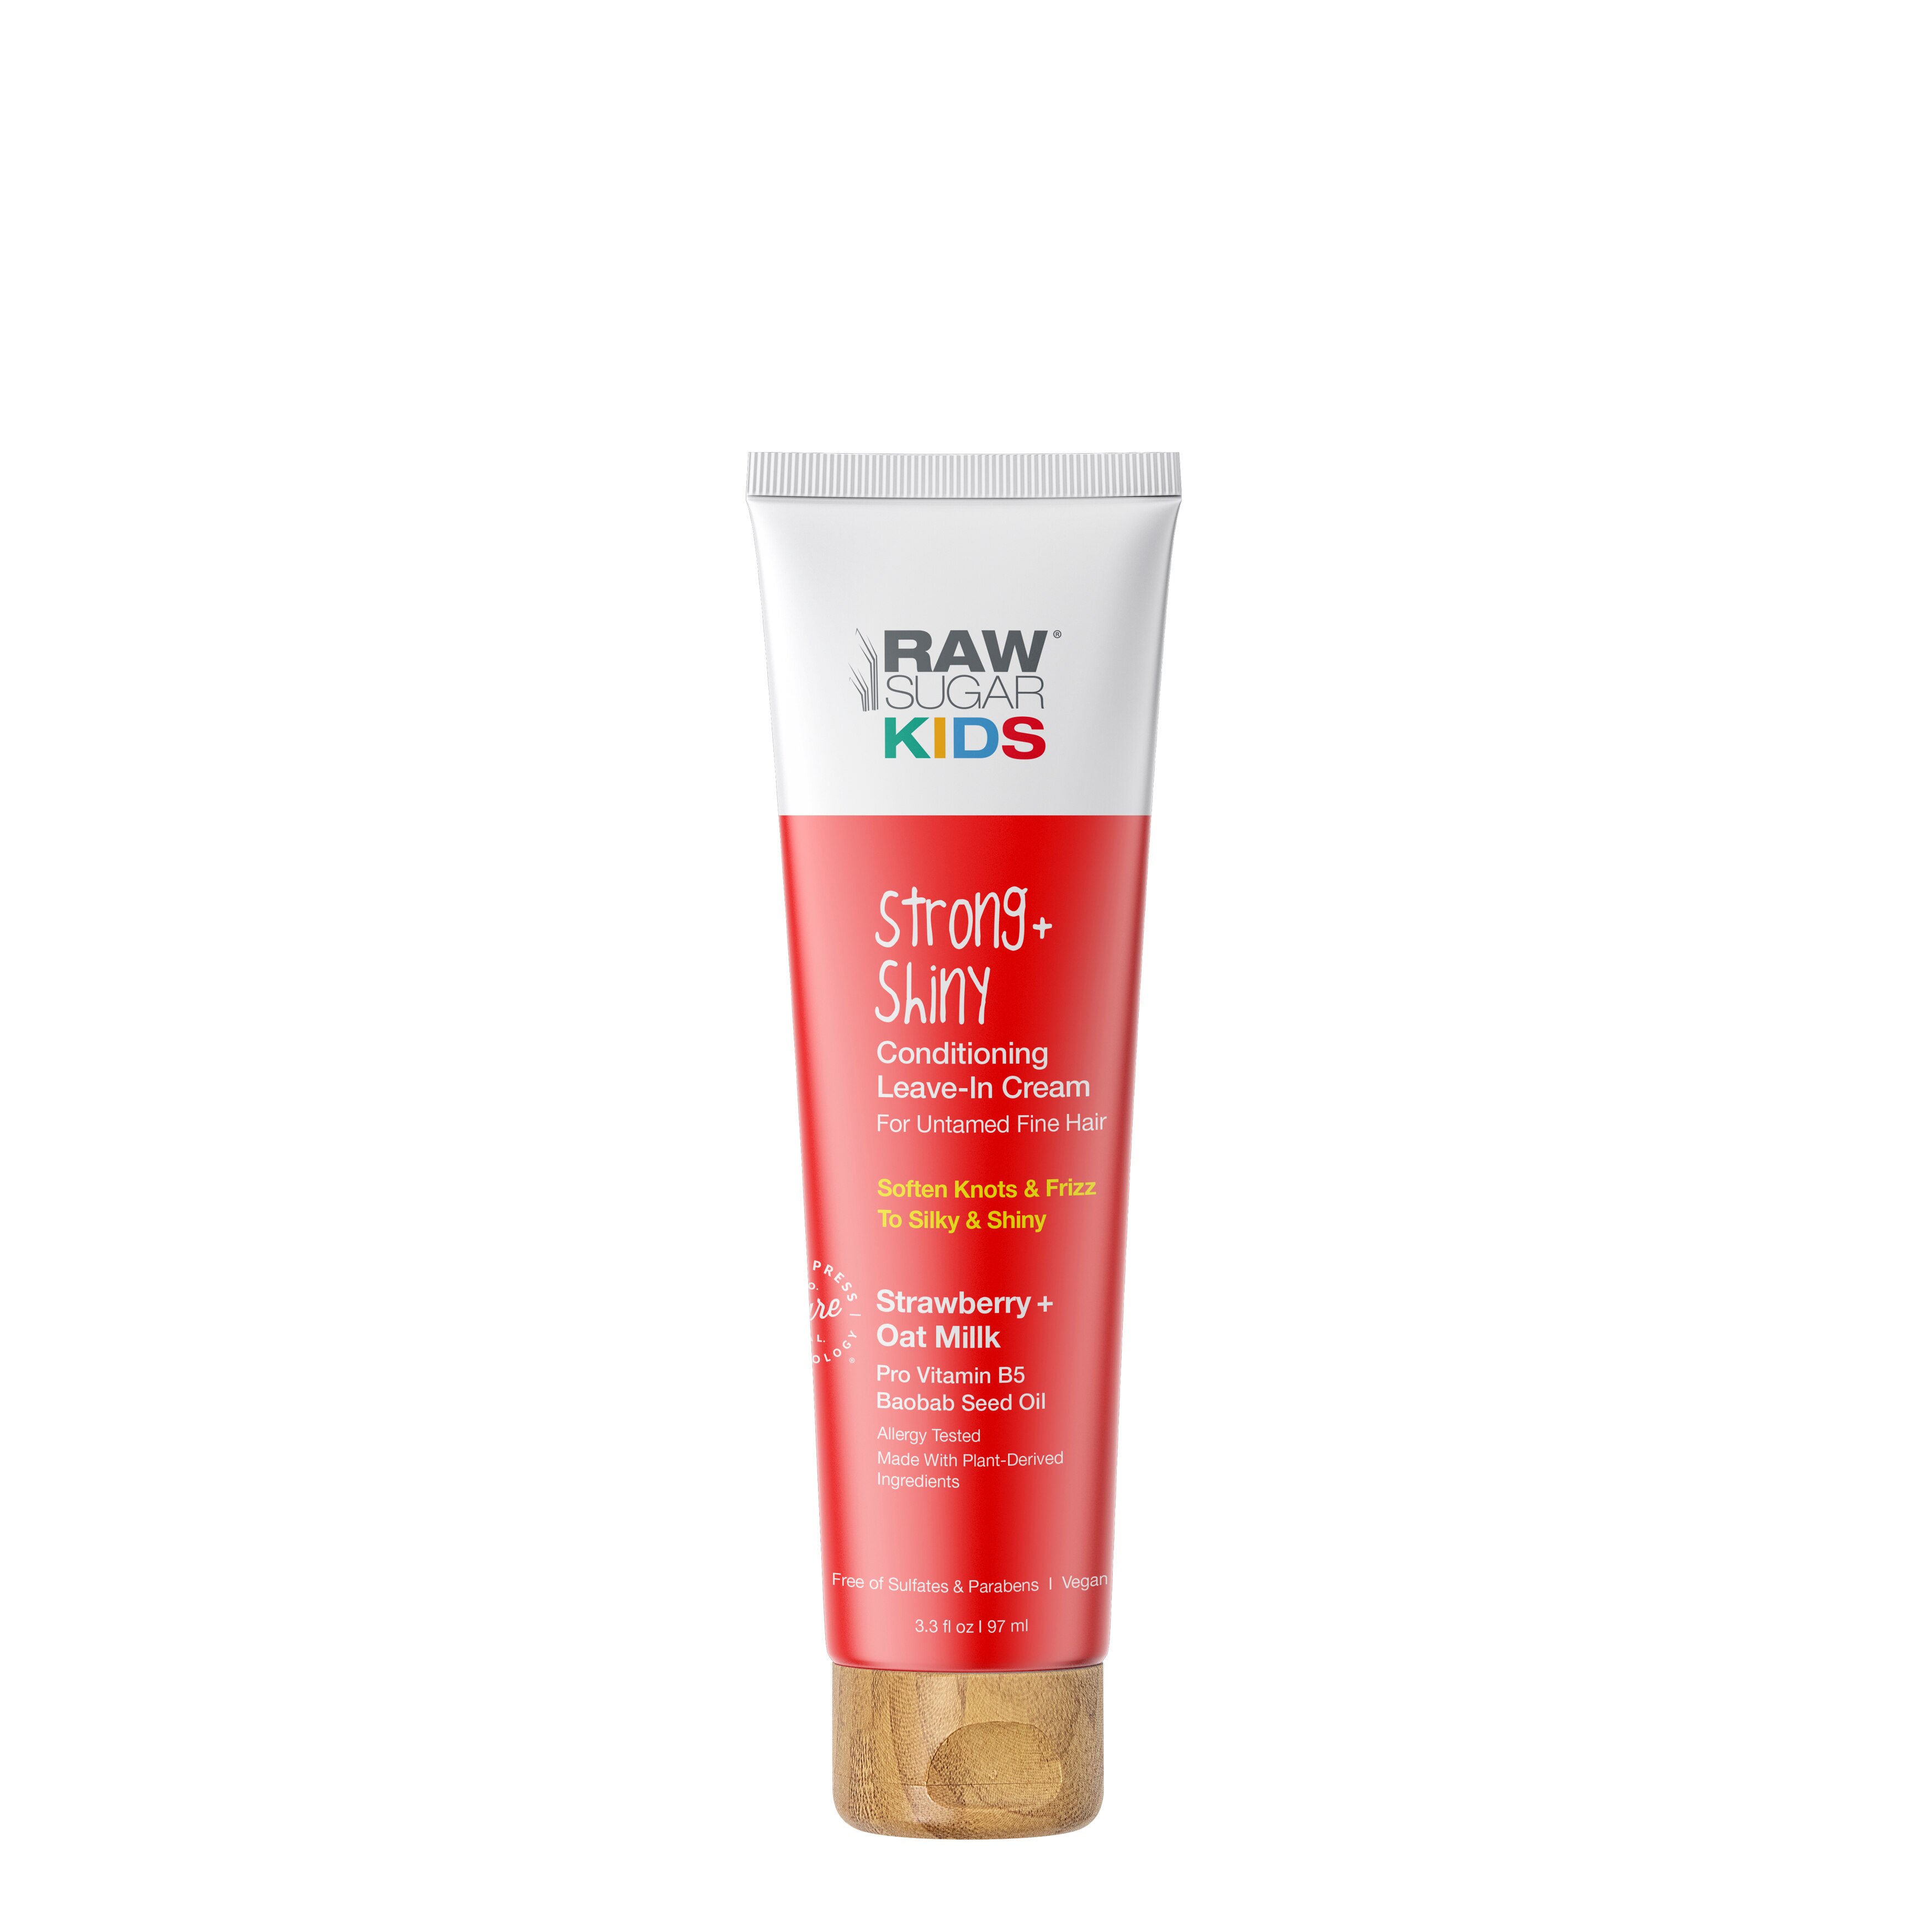 Raw Sugar Kid's Strong + Shiny Leave In Conditioning Cream - 6 Oz , CVS